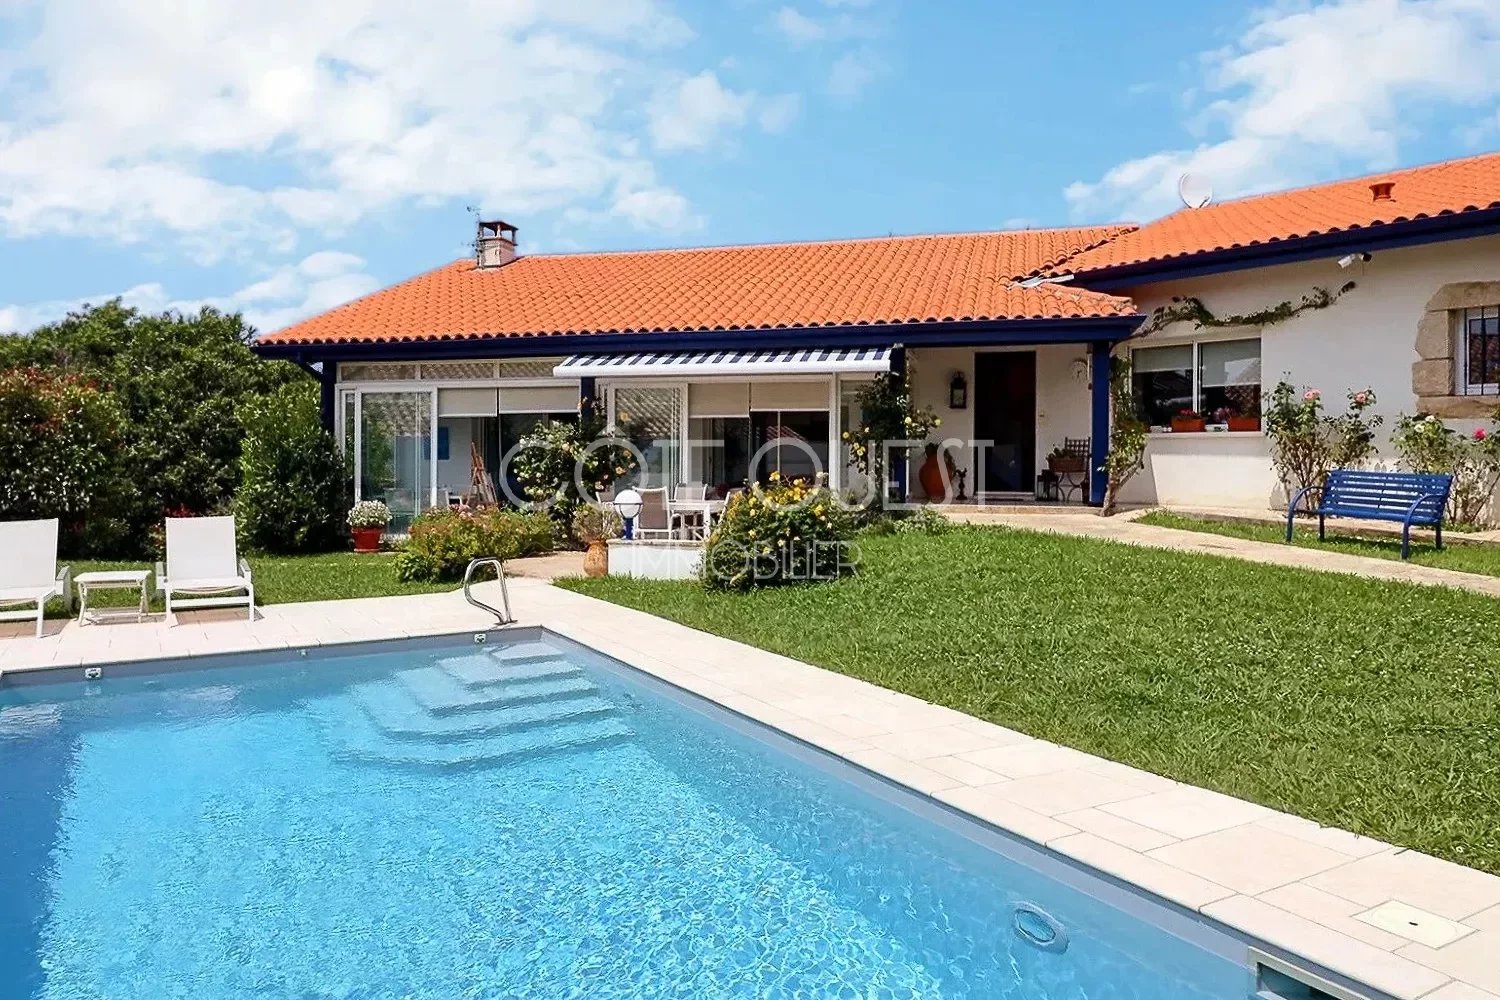 GUÉTHARY – A PEACEFUL PROPERTY WITH A SWIMMING POOL